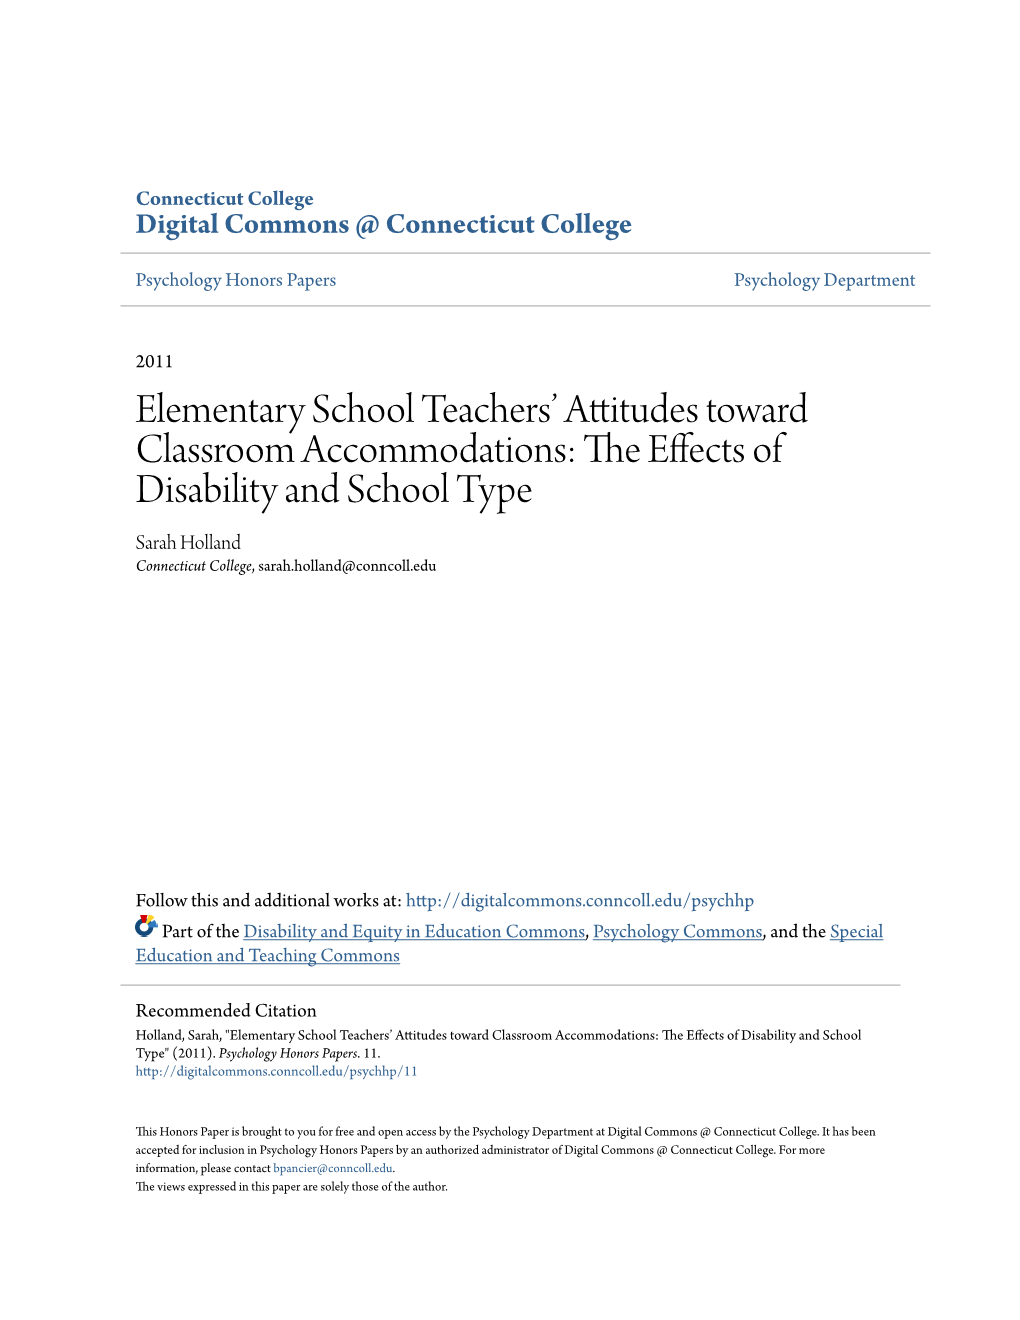 Elementary School Teachers' Attitudes Toward Classroom Accommodations: the Effects of Disability and School Type